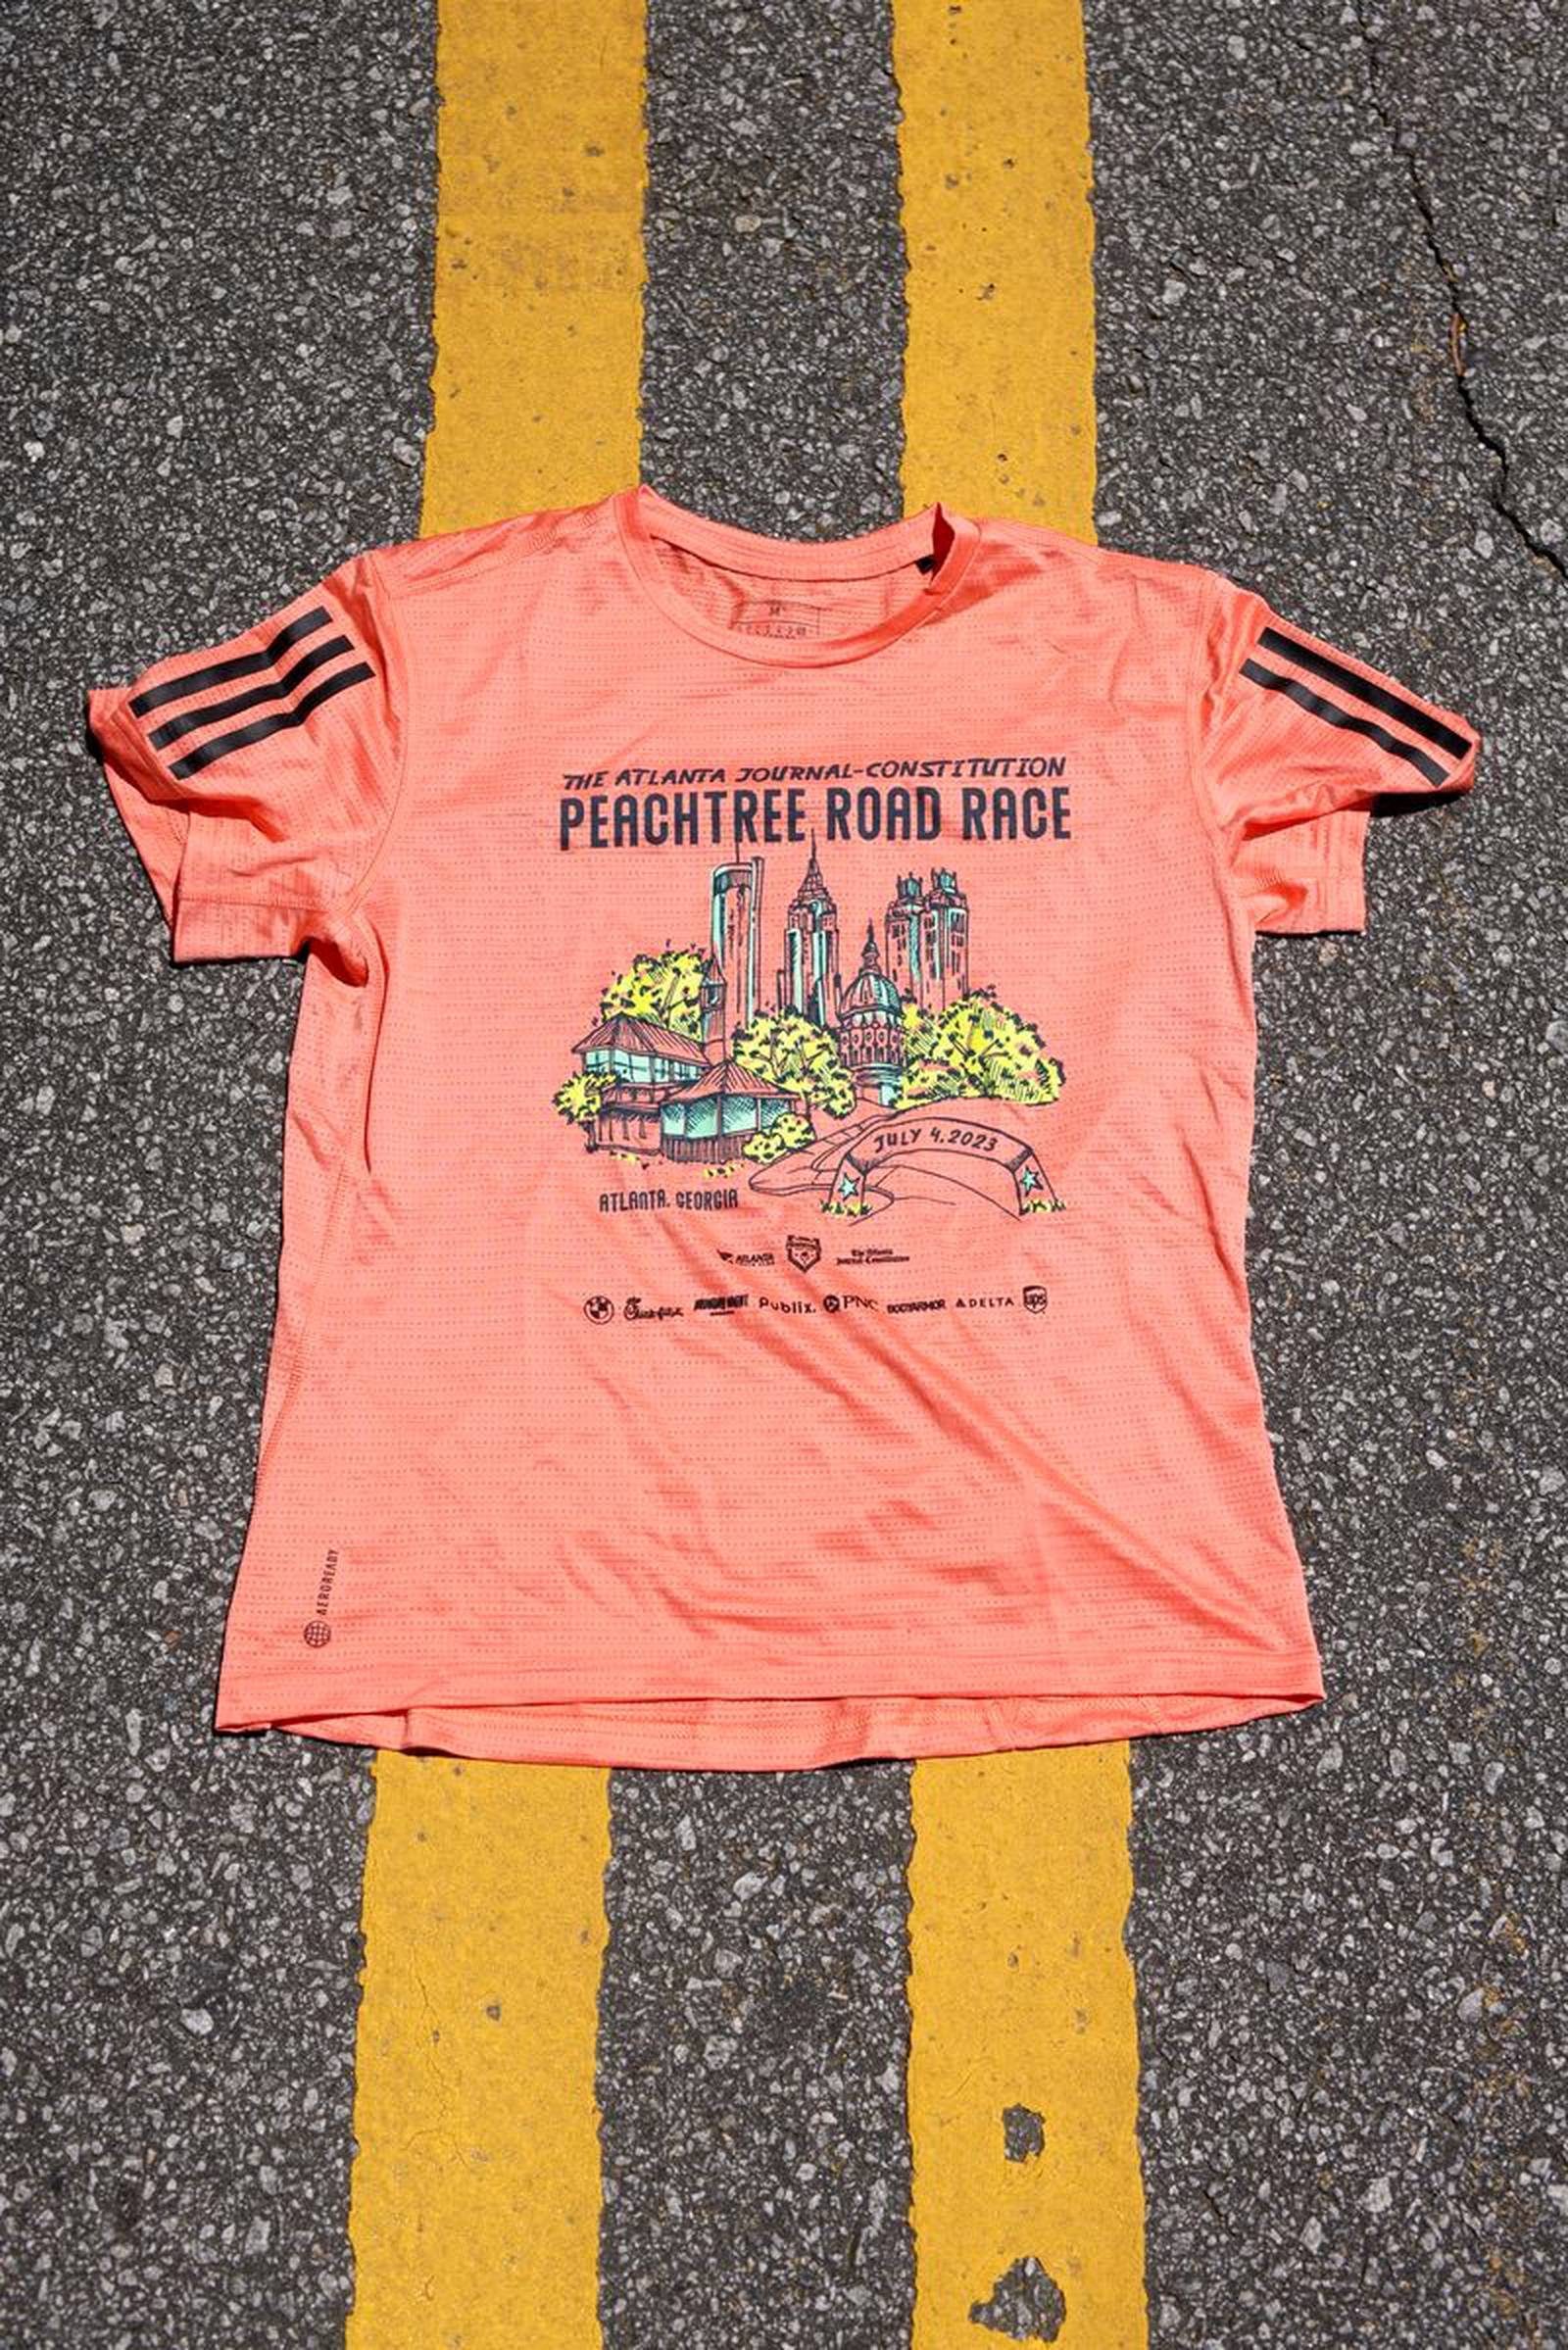 And the official 2023 AJC Peachtree Road Race Tshirt winning design is